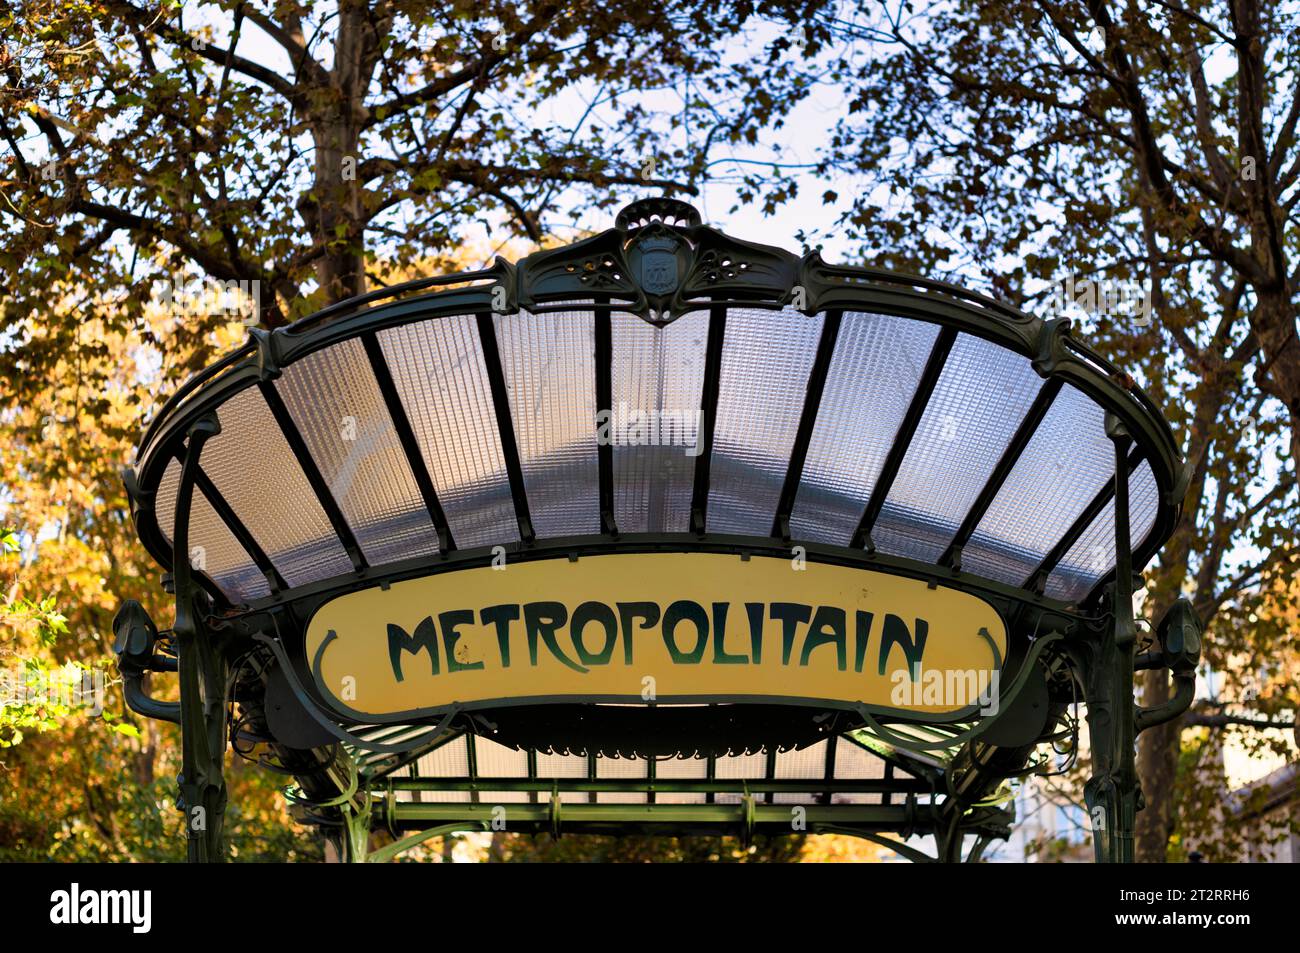 Entrance of the Metro station Abbesses with original Guimard roof in Art nouveau style, designed by Hector Guimard, Metro, Montmartre, Paris, France Stock Photo